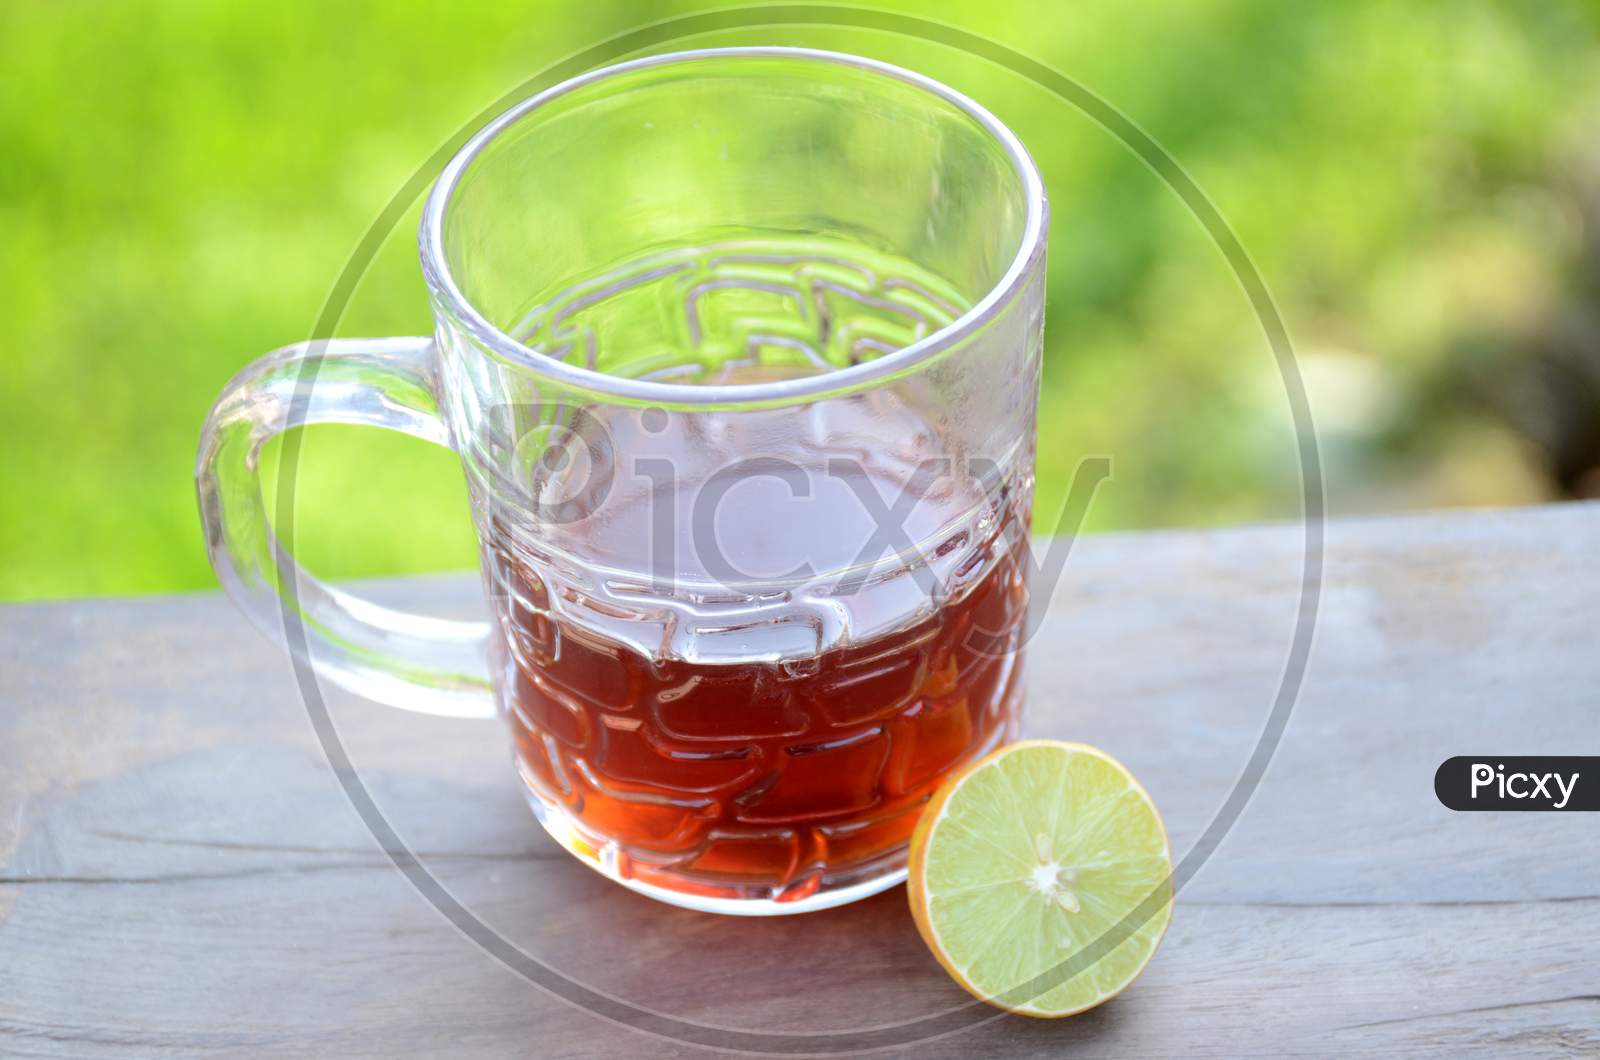 The Black Lemon Tea In The Glass Cup With Lemon On The Brown Green Background.